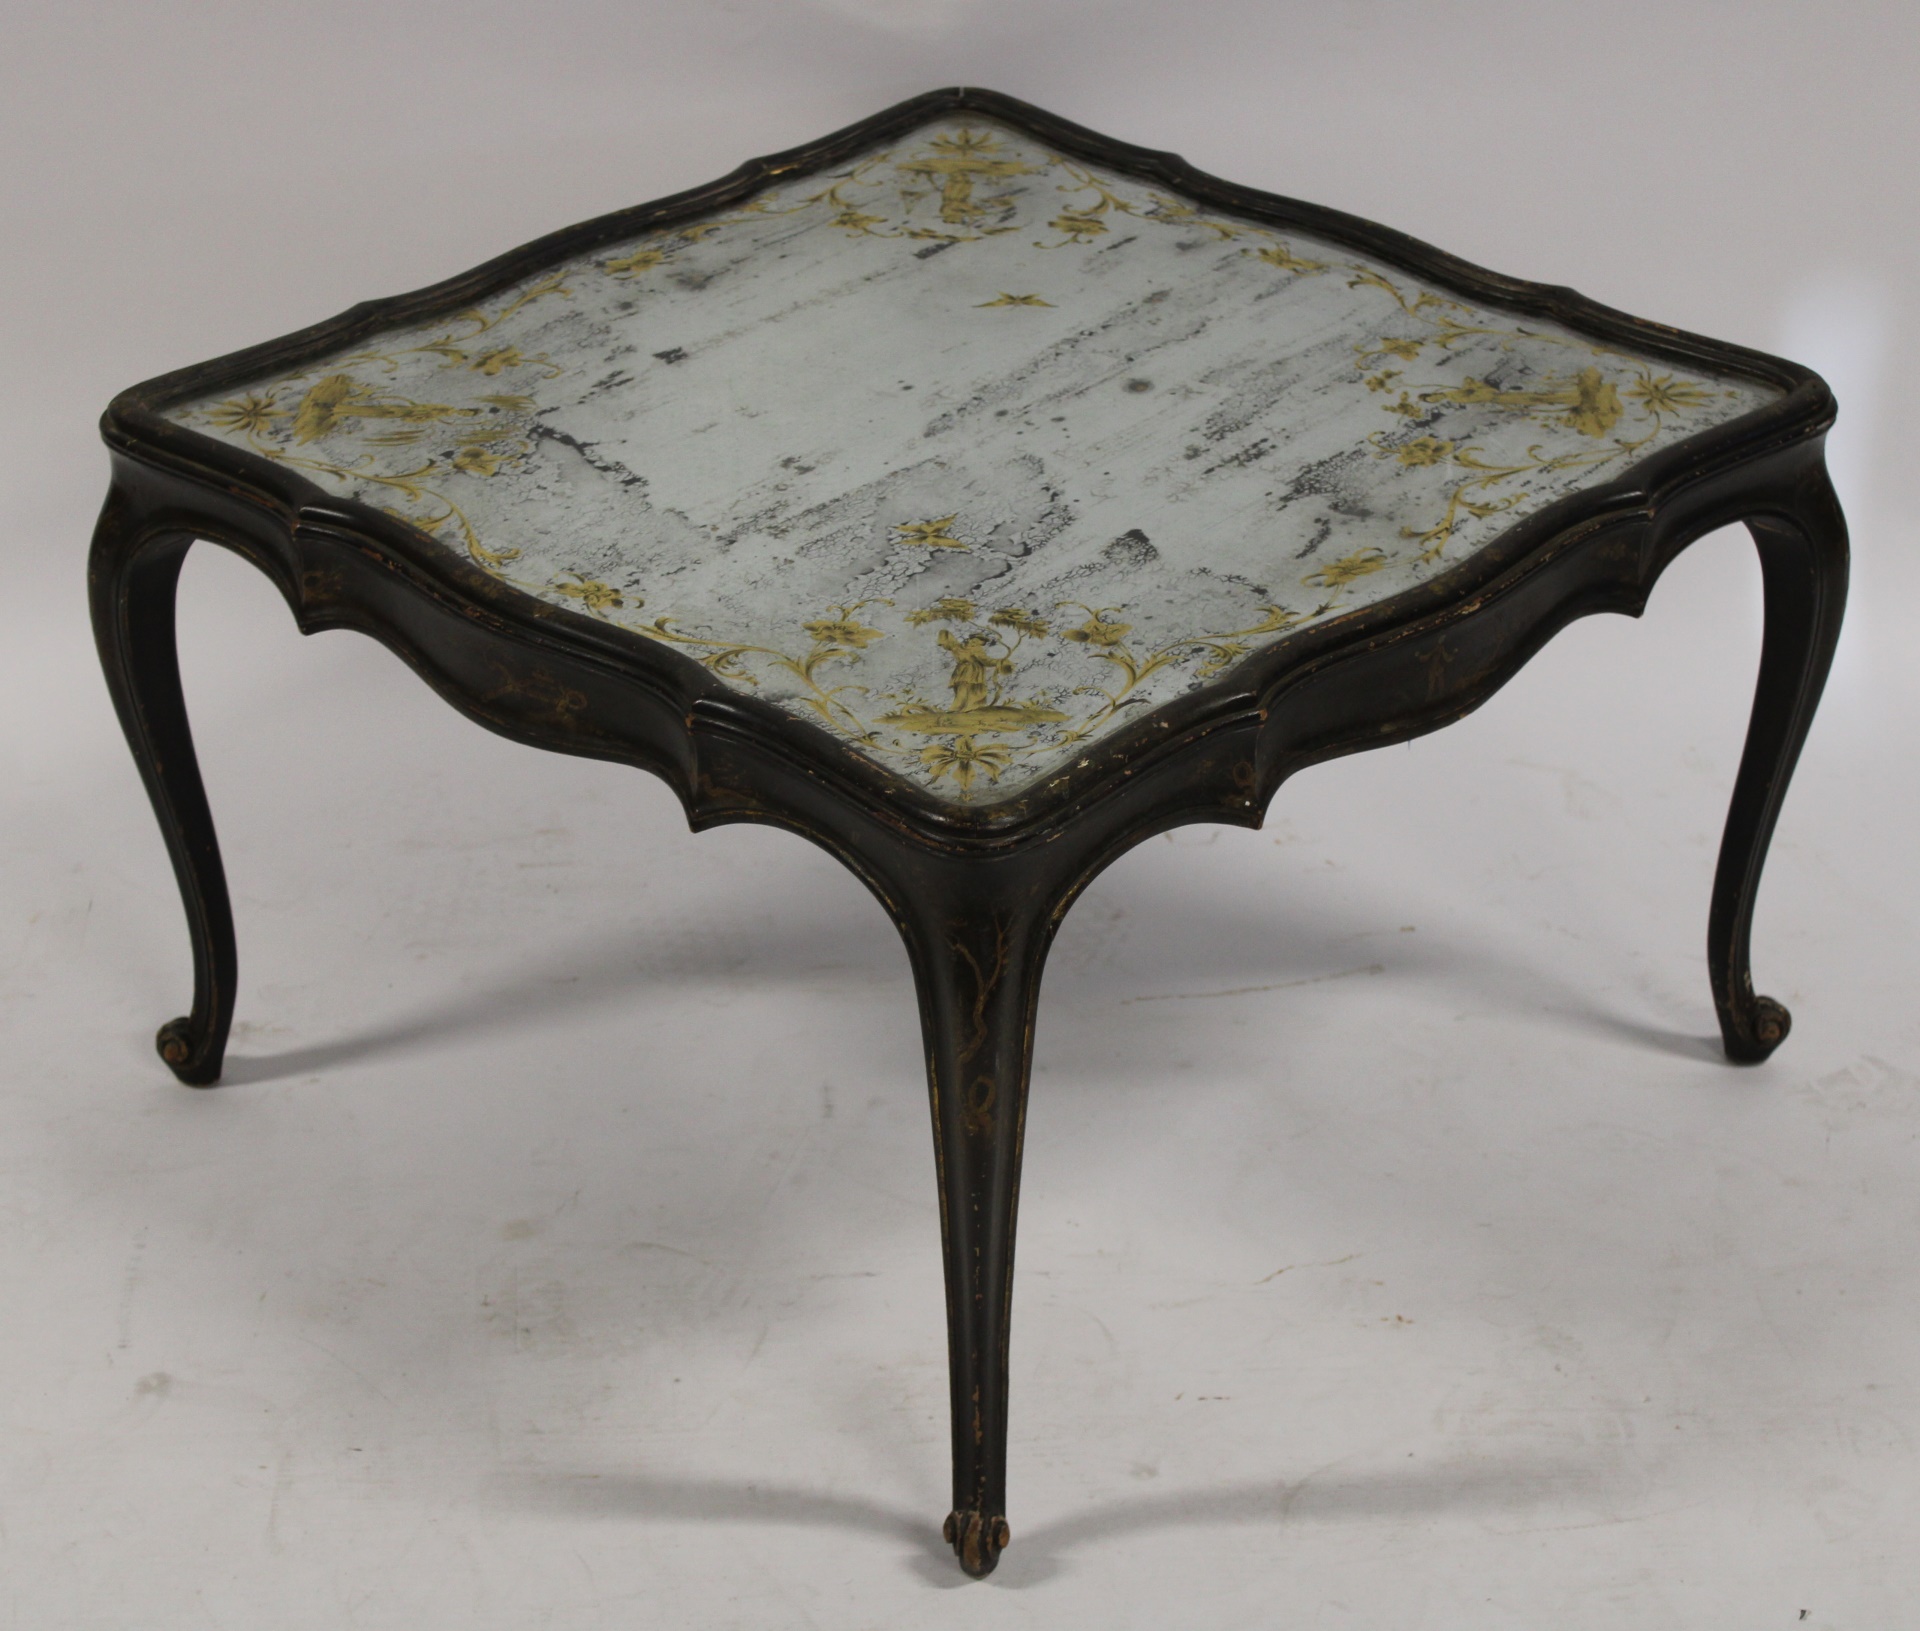 MIDCENTURY COFFEE TABLE WITH CHINOISERIE